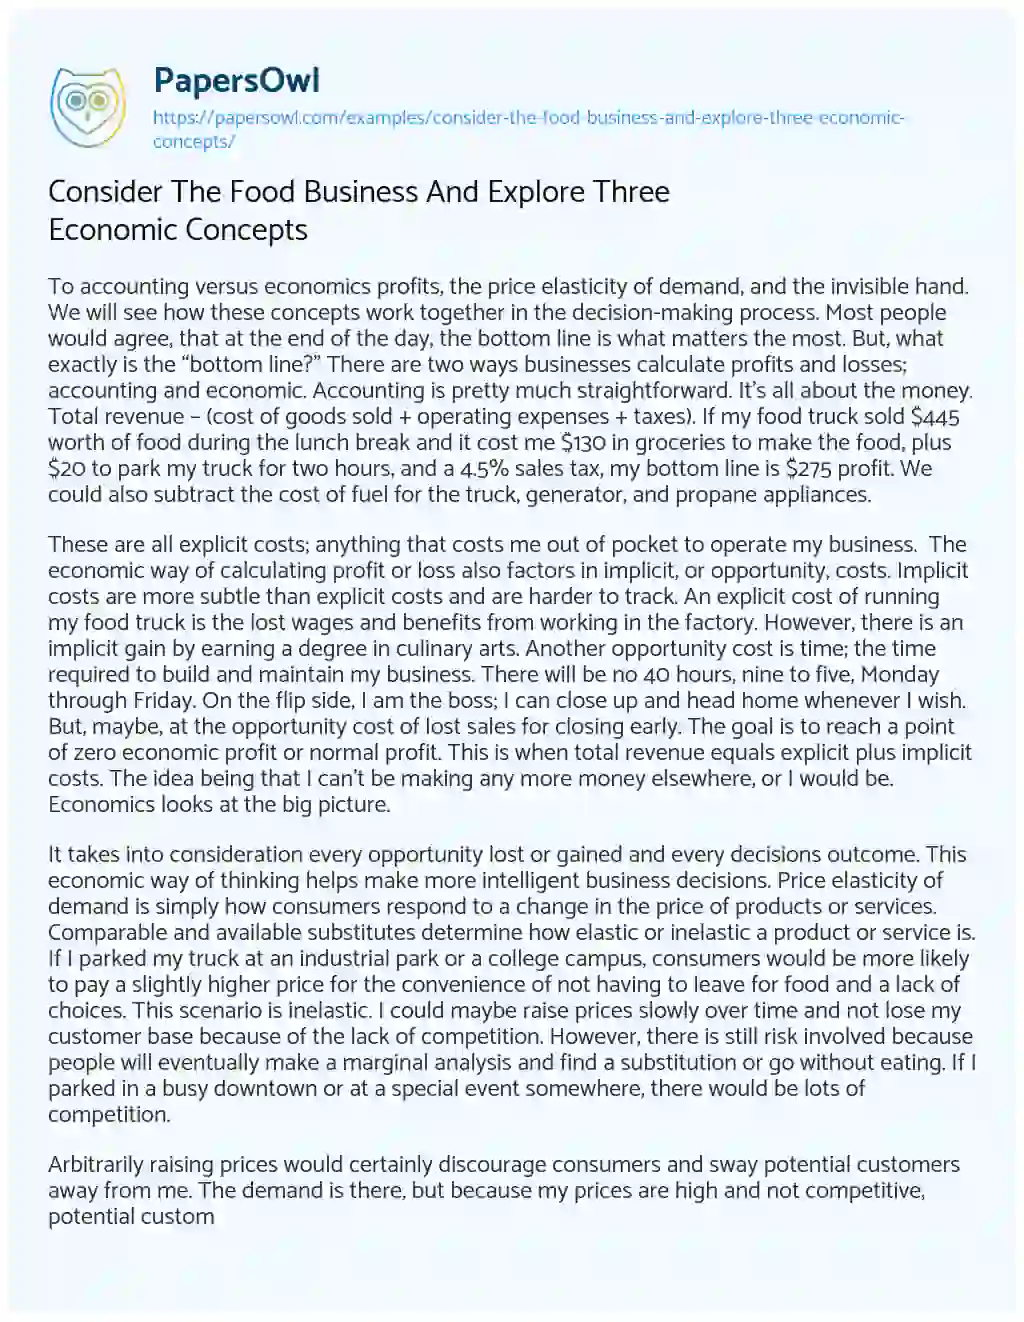 Essay on Consider the Food Business and Explore Three Economic Concepts